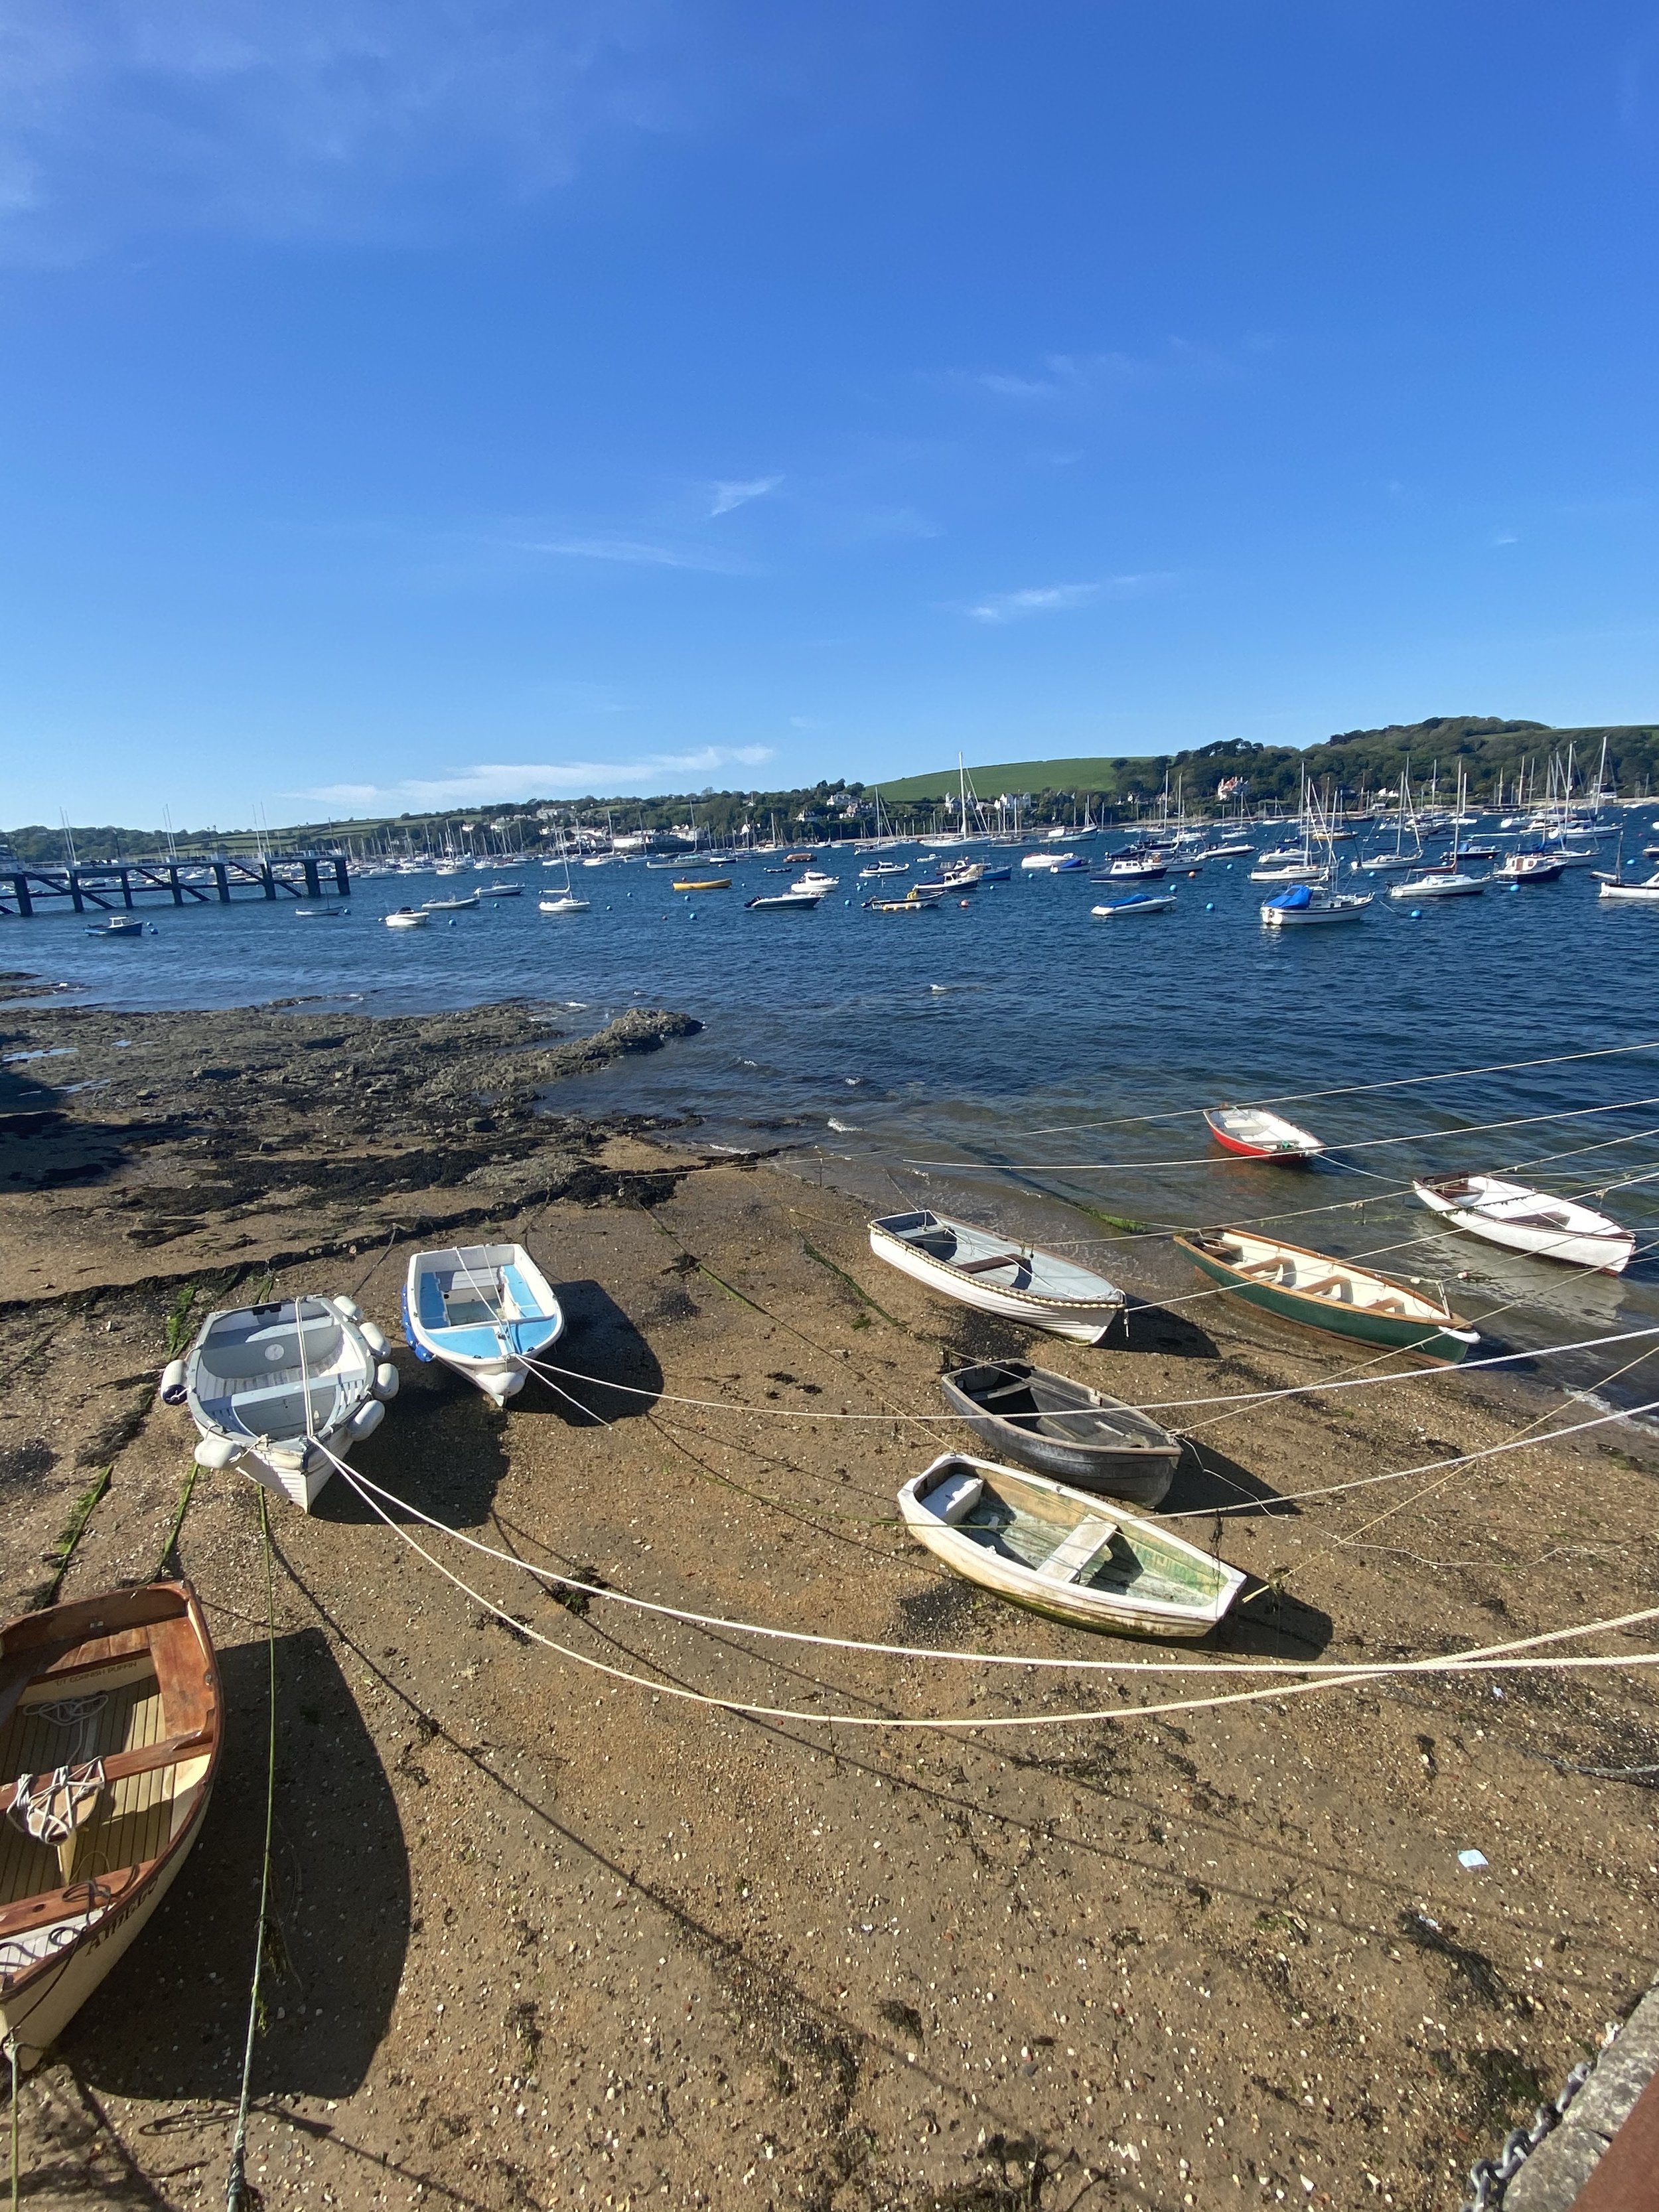 Boats in Falmouth, Cornwall